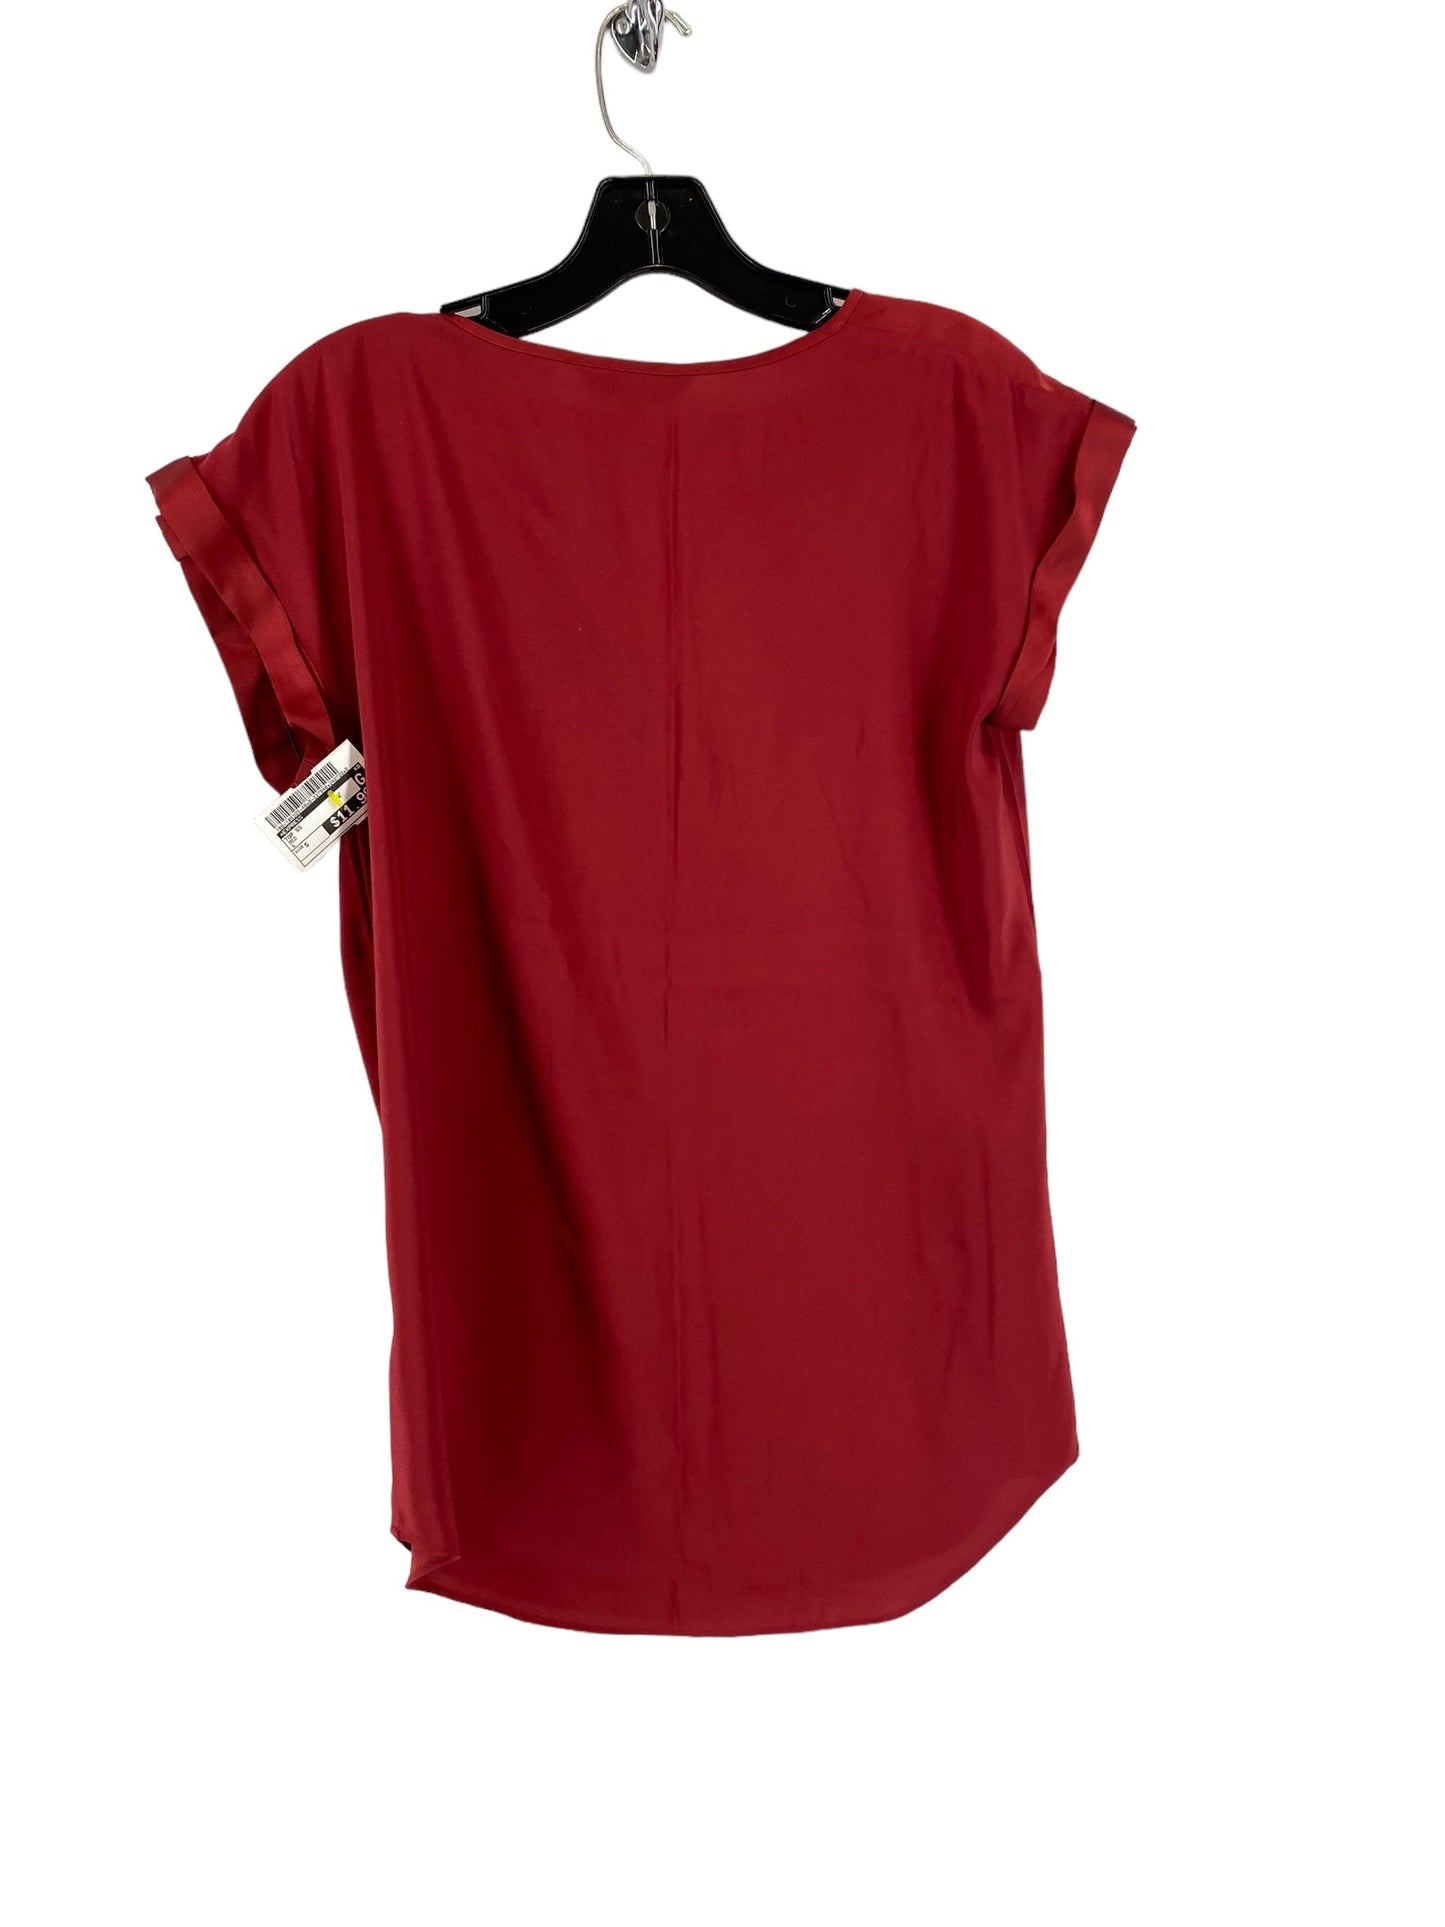 Red Top Short Sleeve Express, Size S